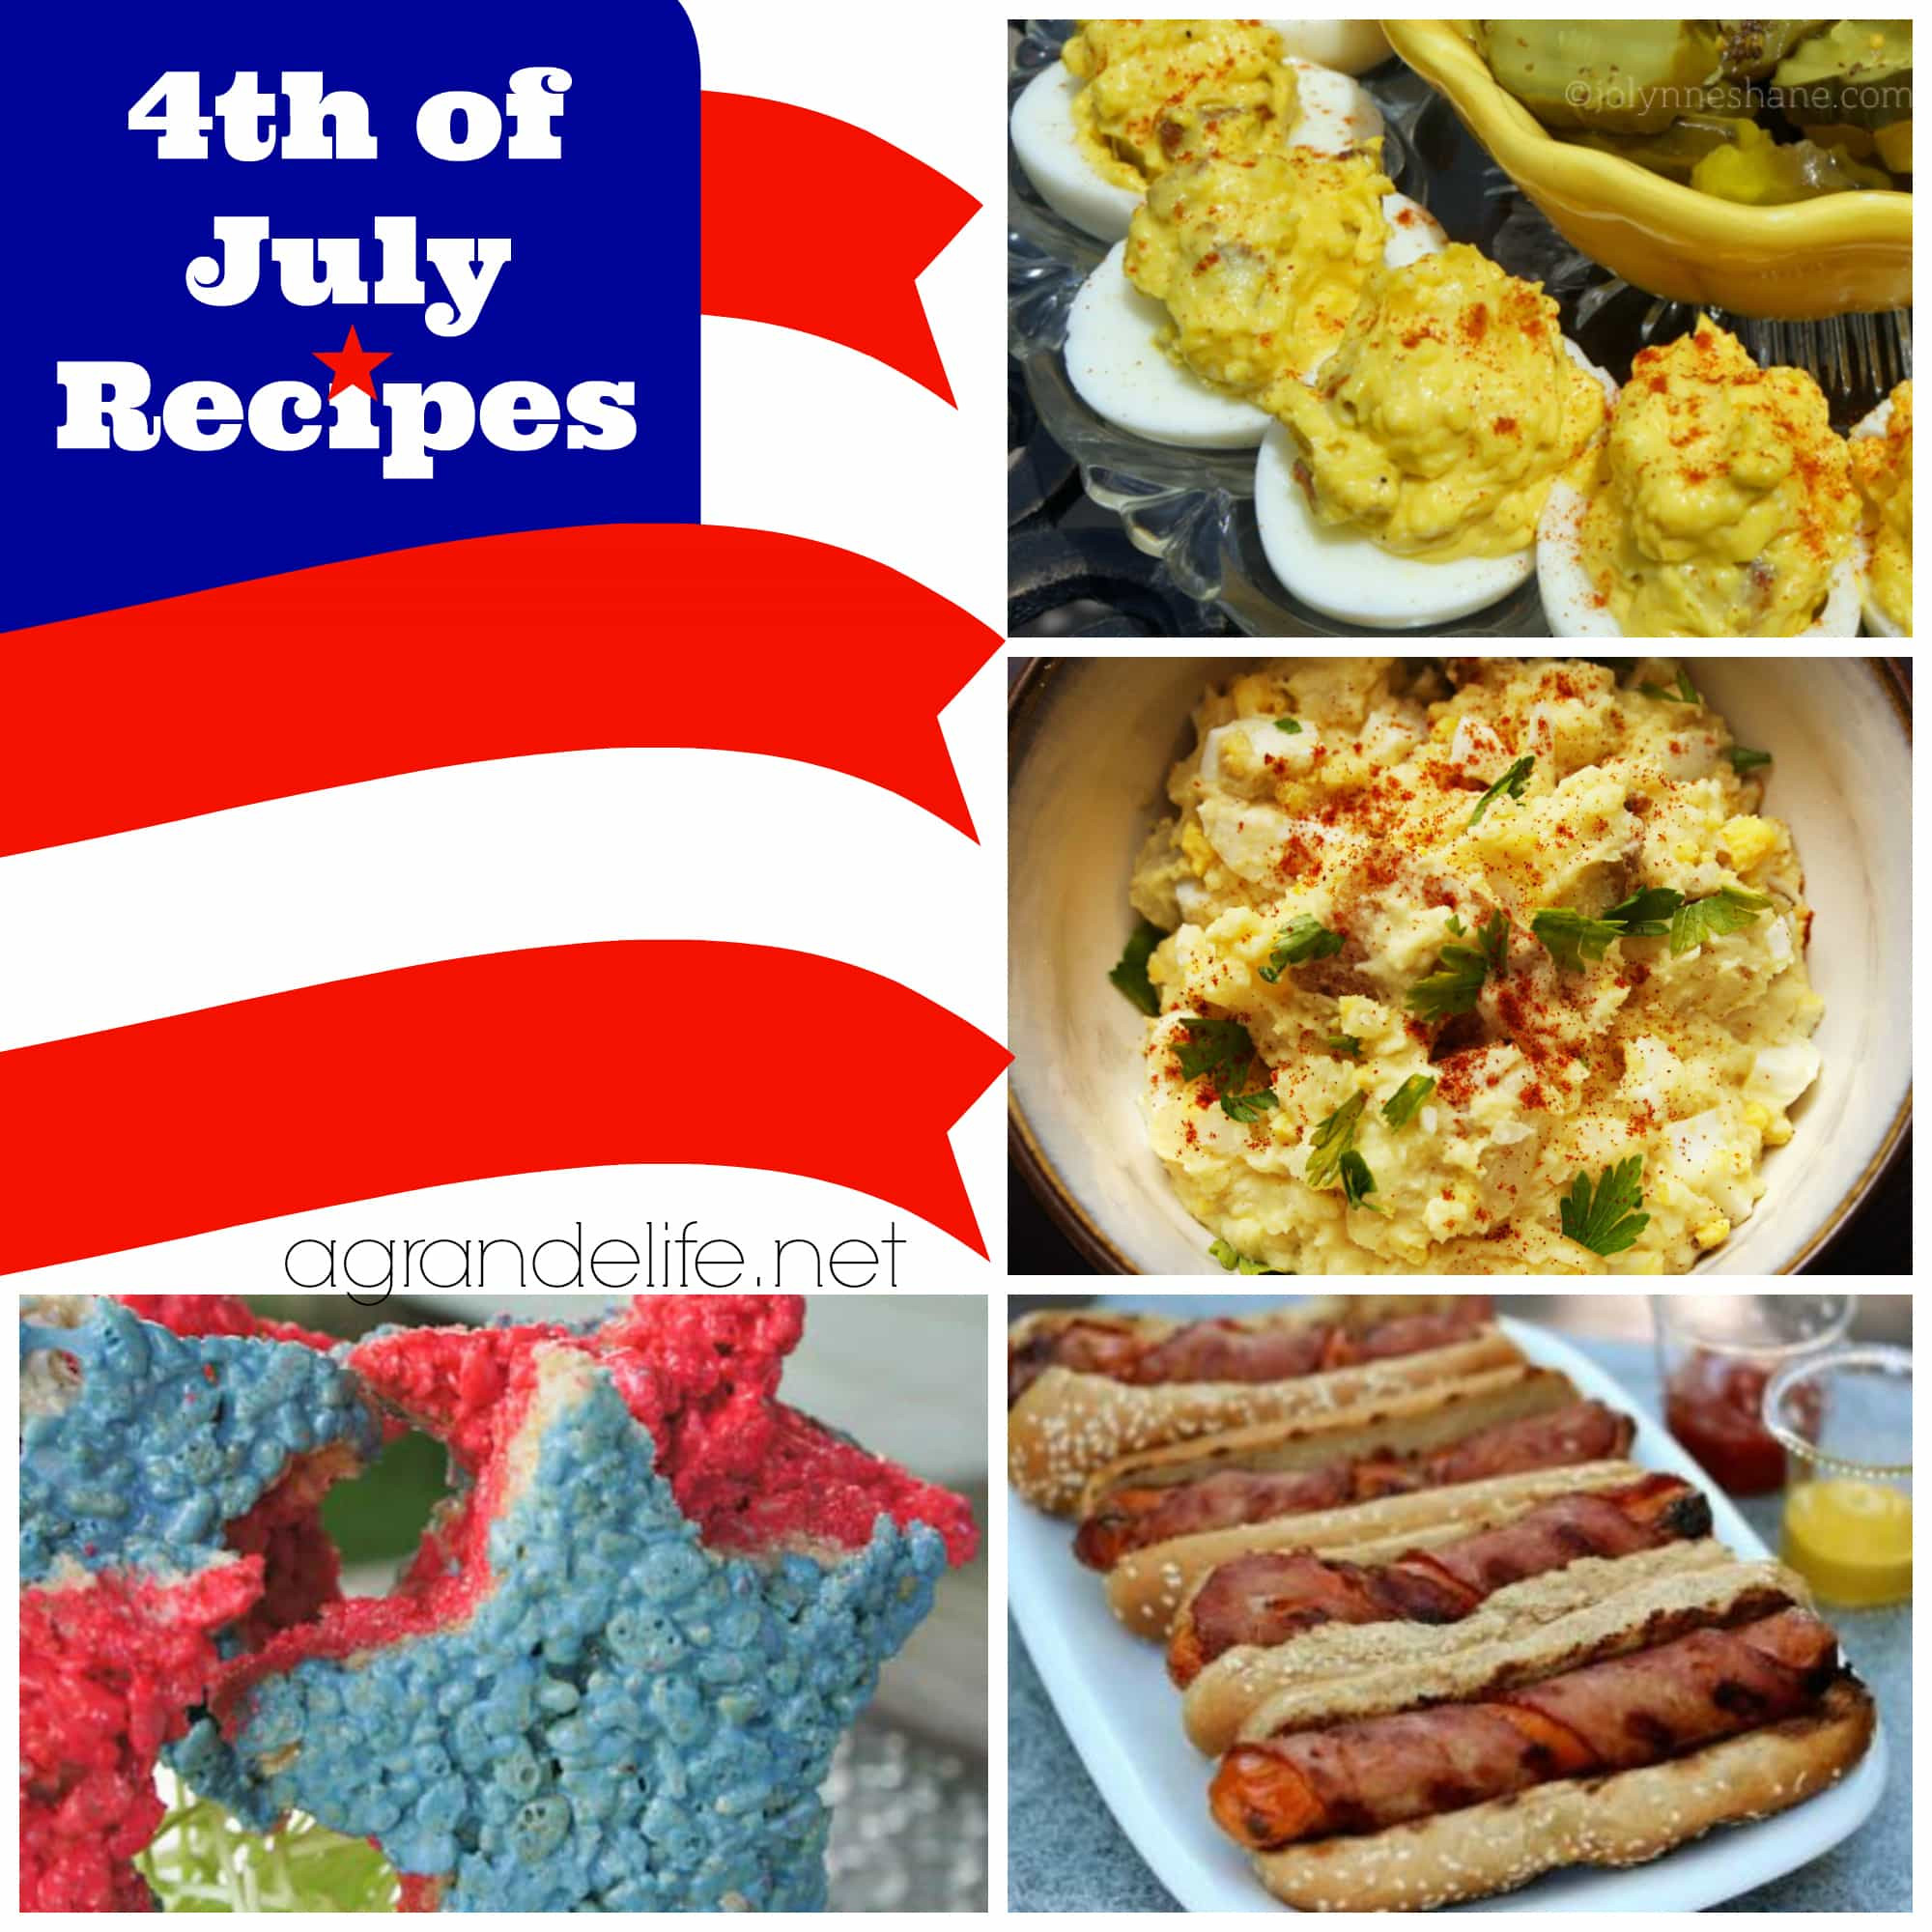 Food Open On 4th Of July
 4th of July Recipes